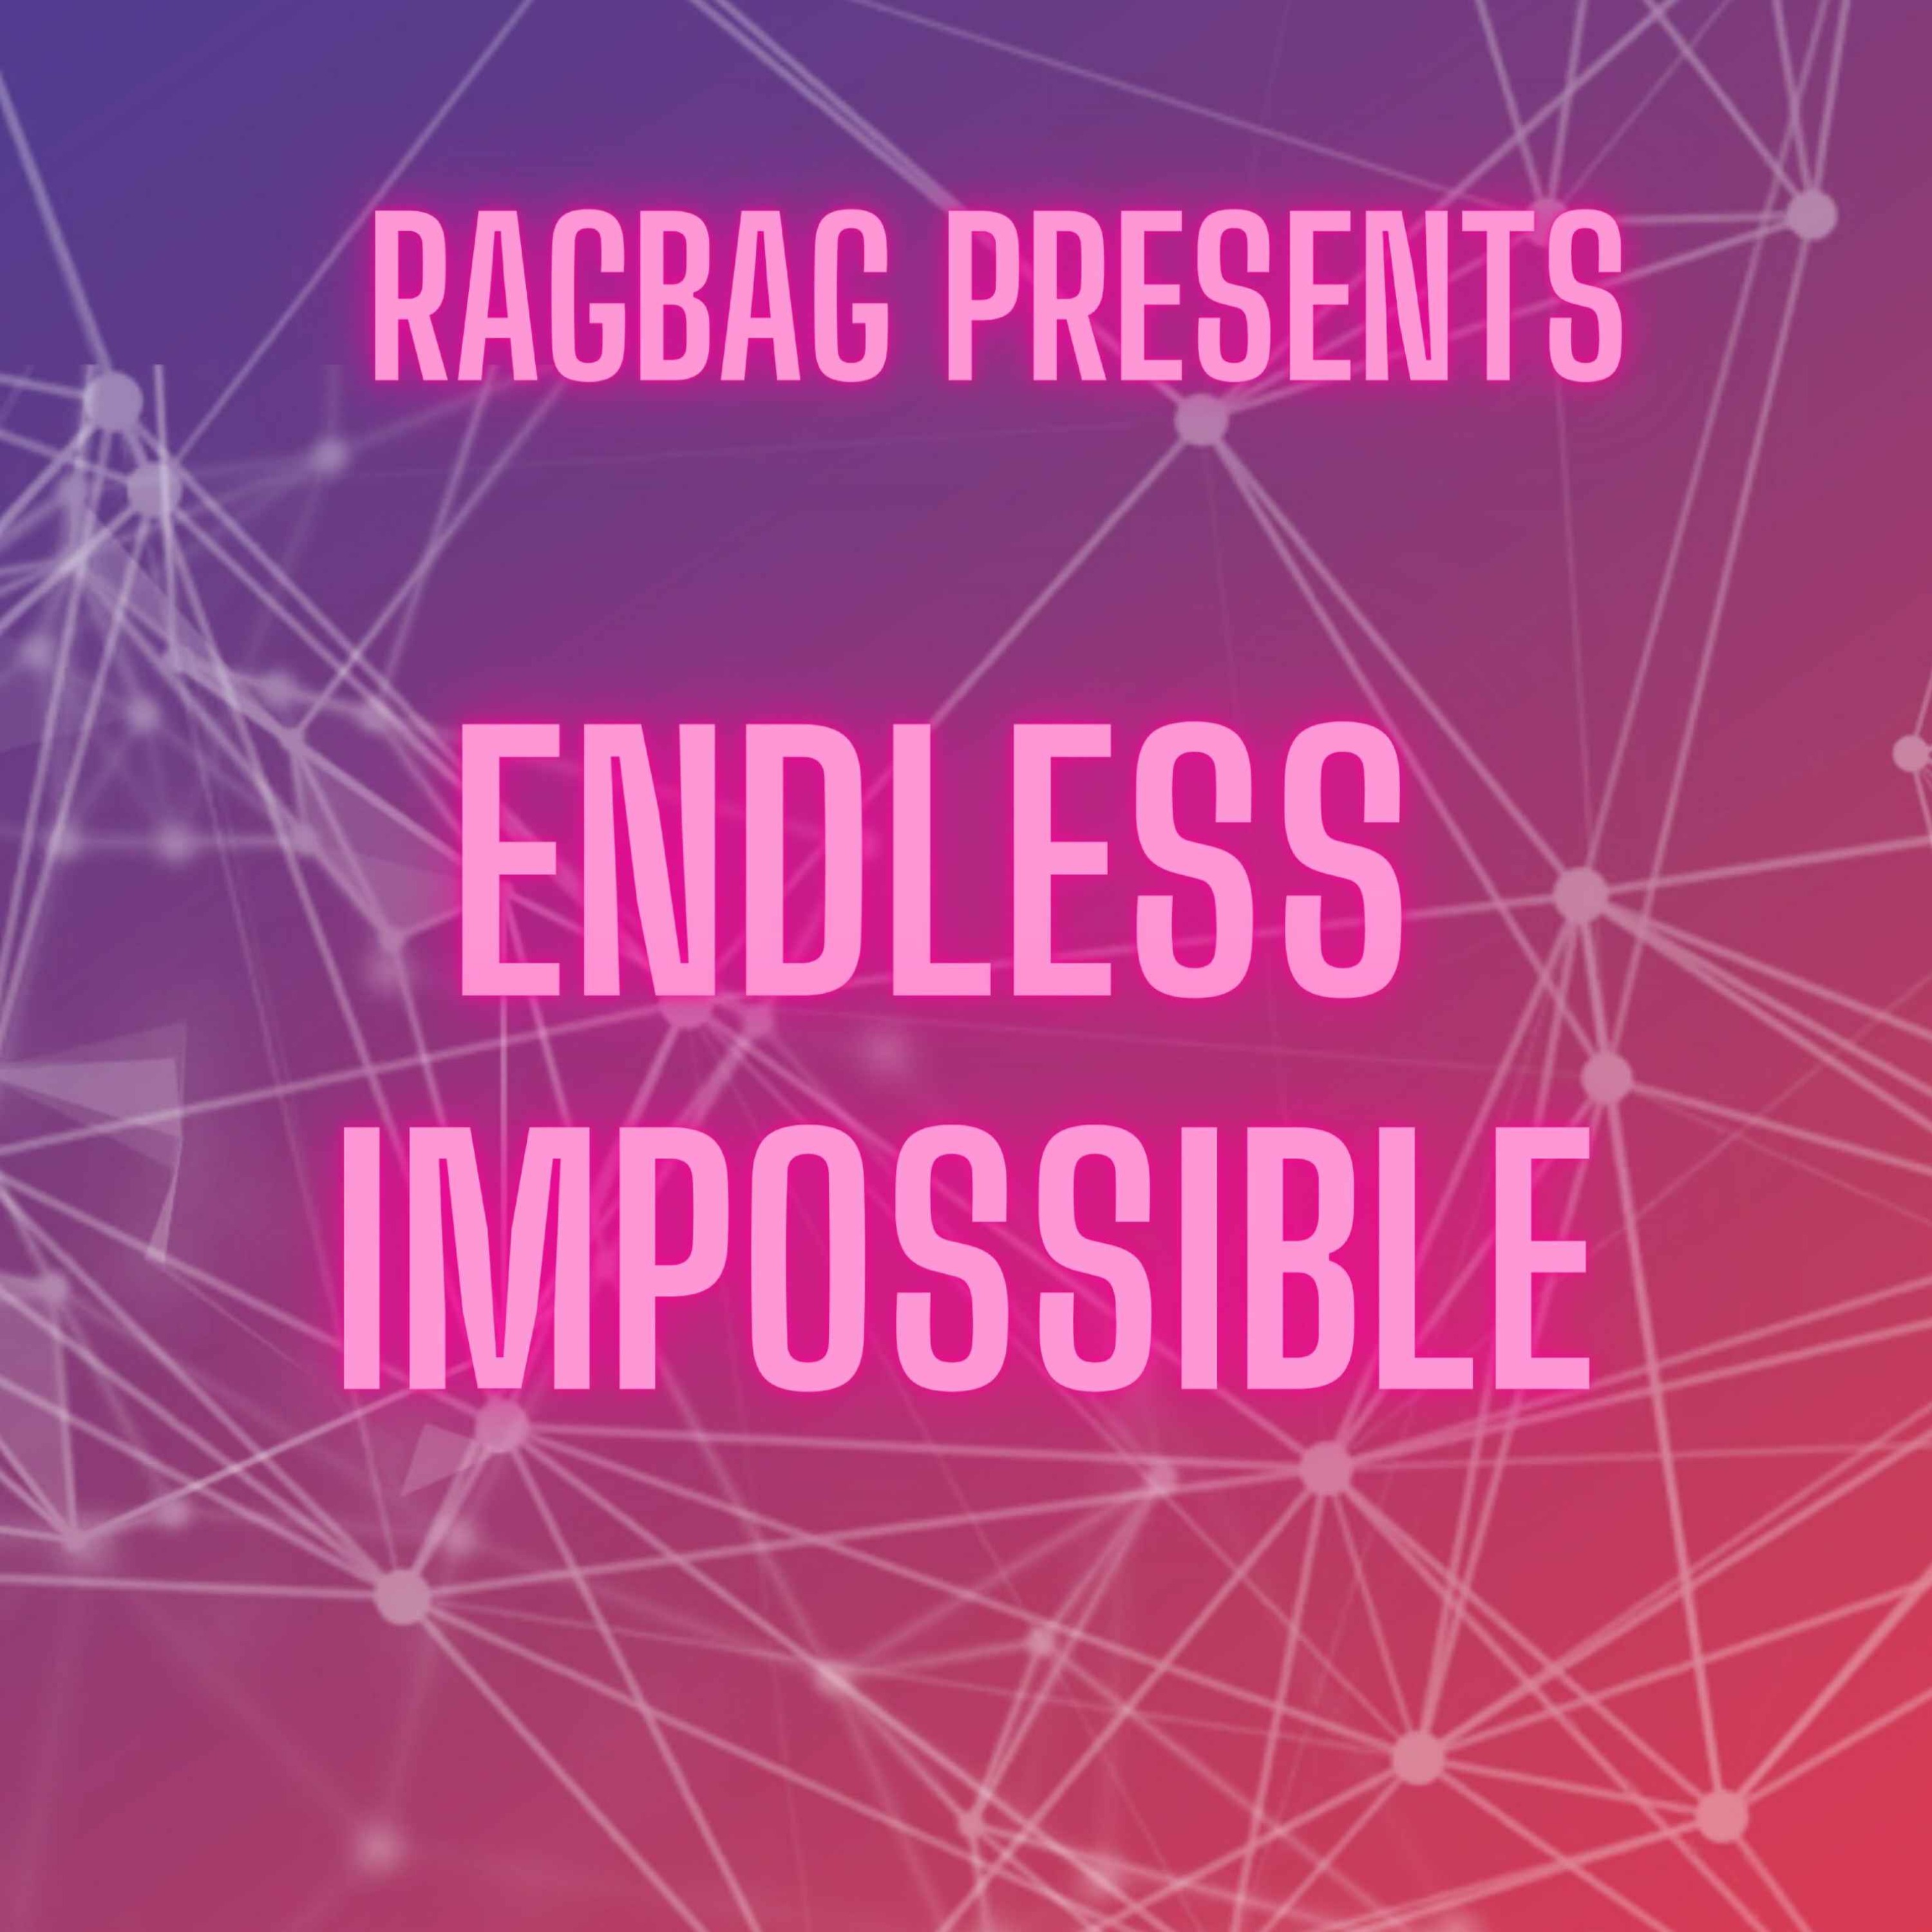 Ragbag’s Fourth Wall: Endless Impossible